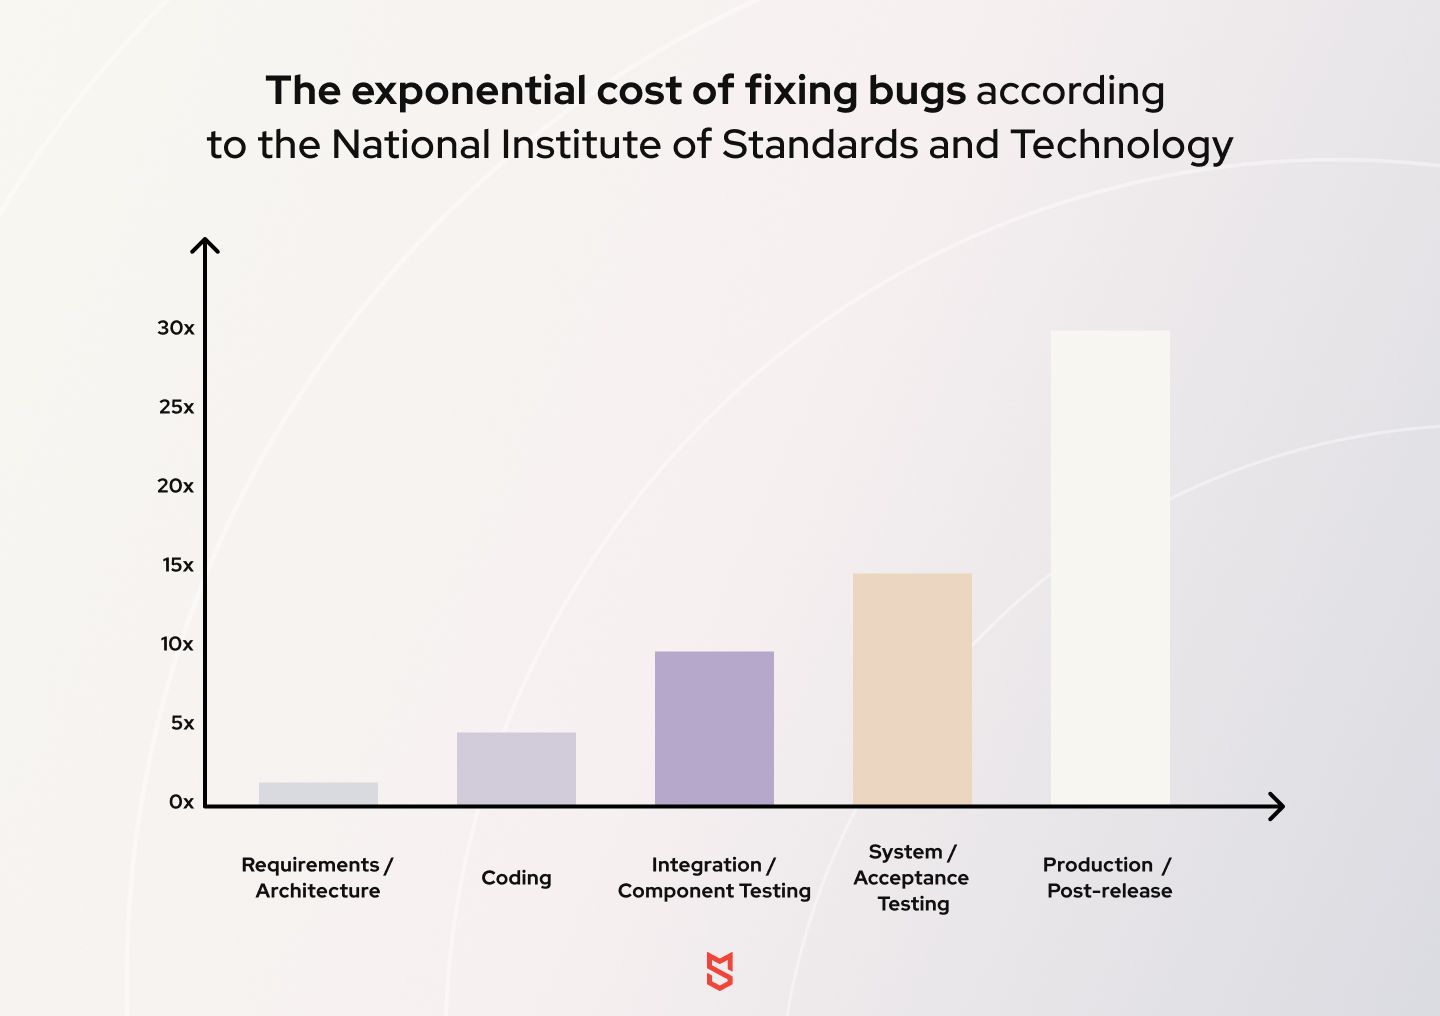 The exponential cost of fixing bugs according to the National Institute of Standards and Technology